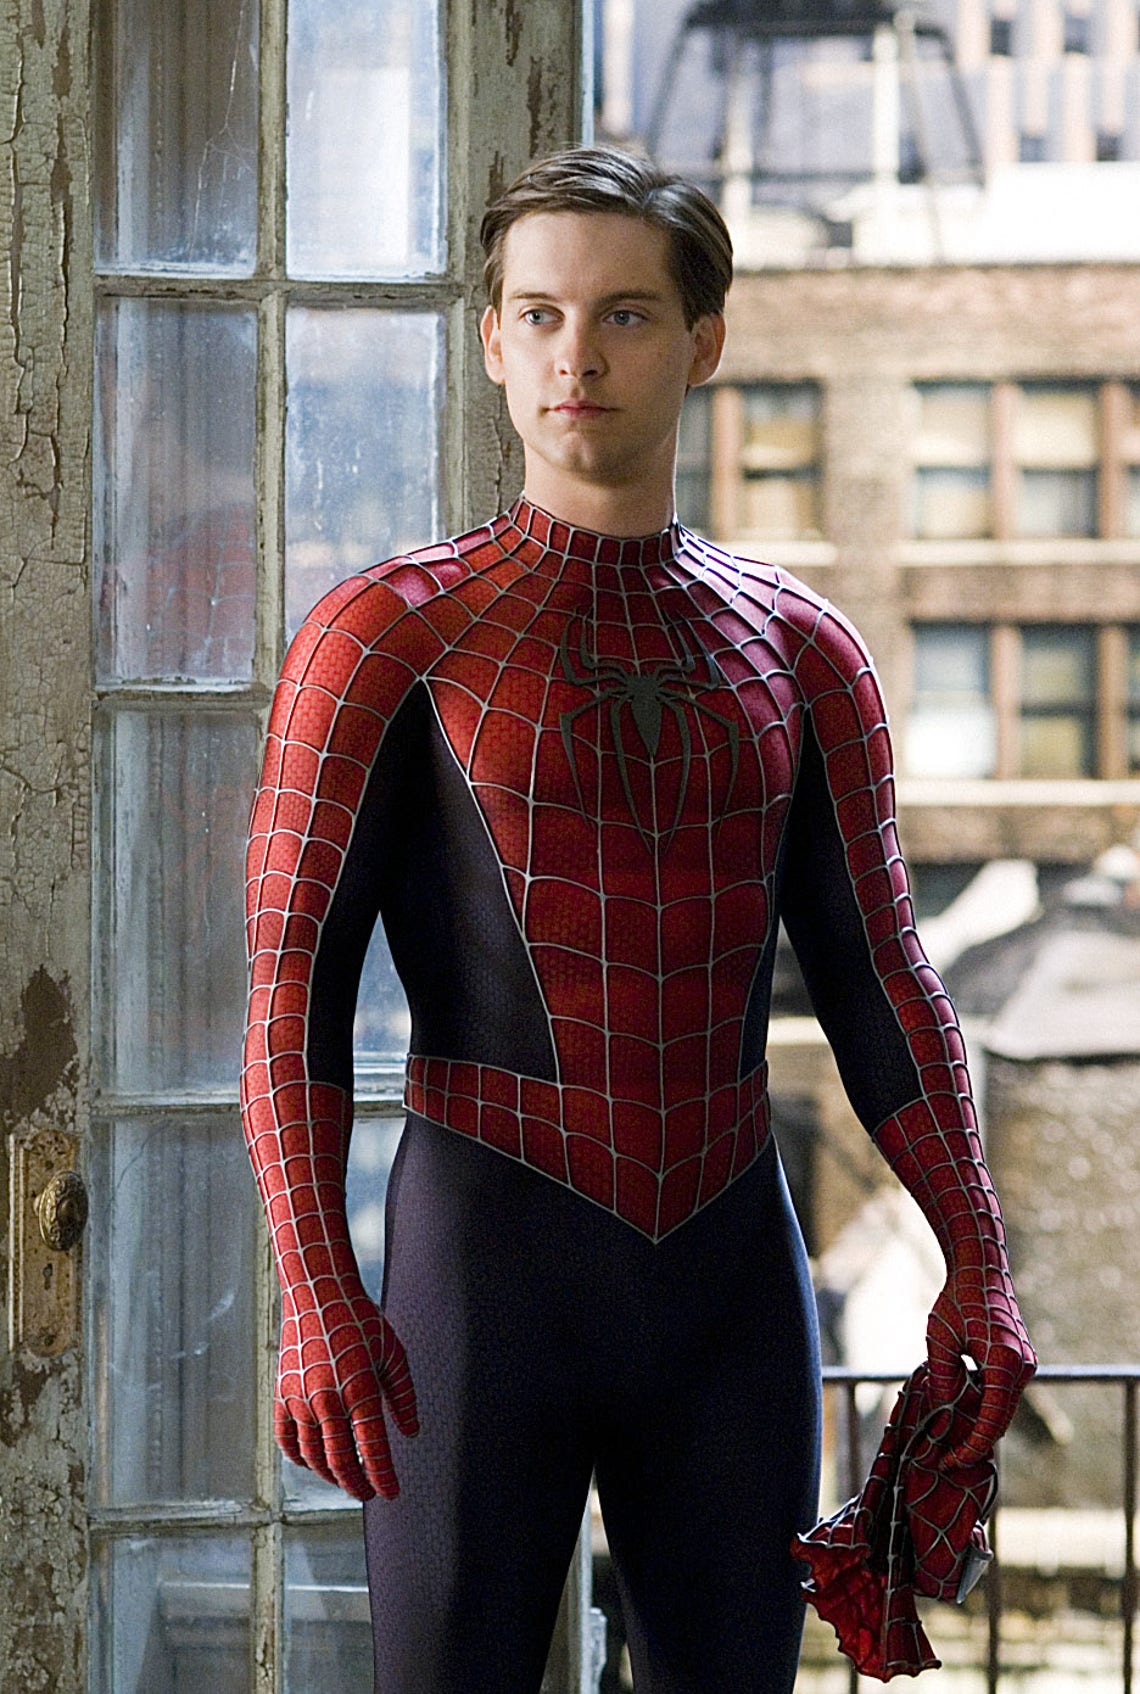 Tobey maguire sexy